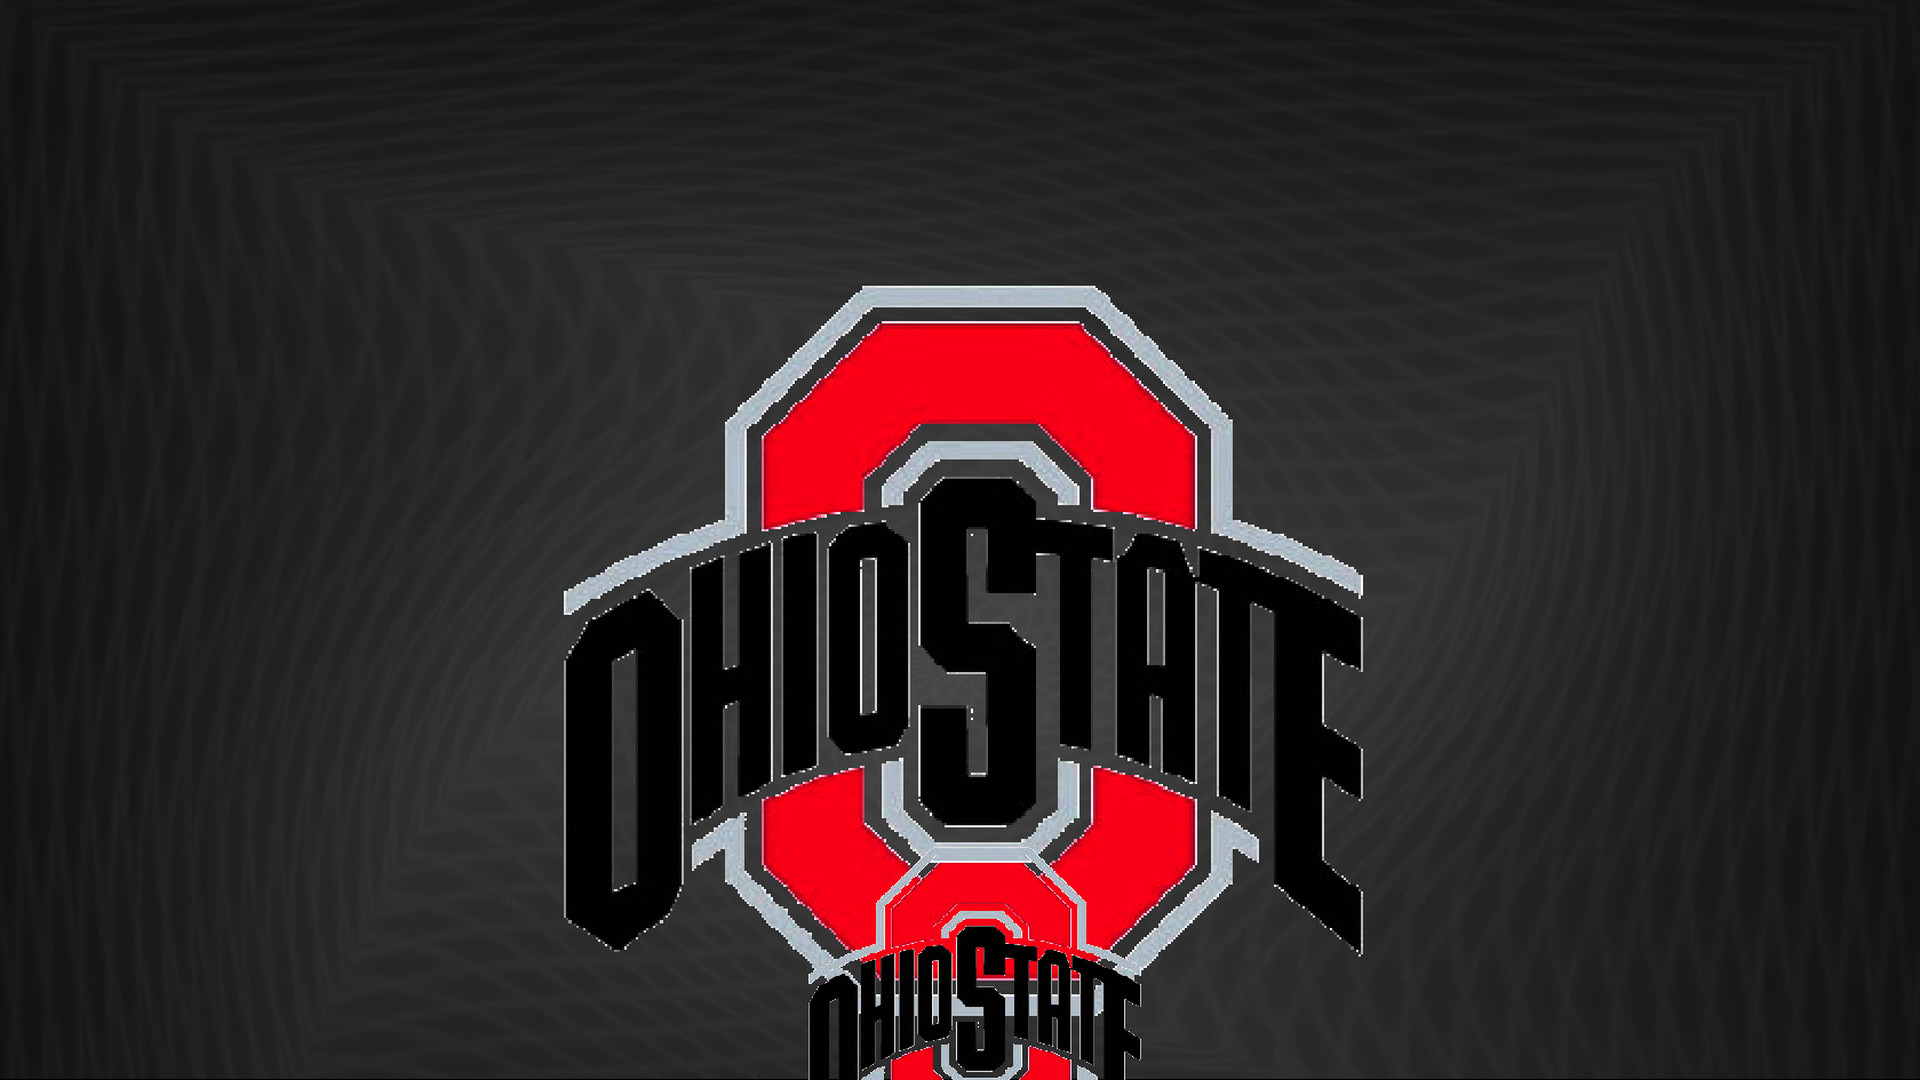 1920x1080 Ohio State Buckeyes Images ATHLETIC LOGO #6 HD Wallpaper And ..